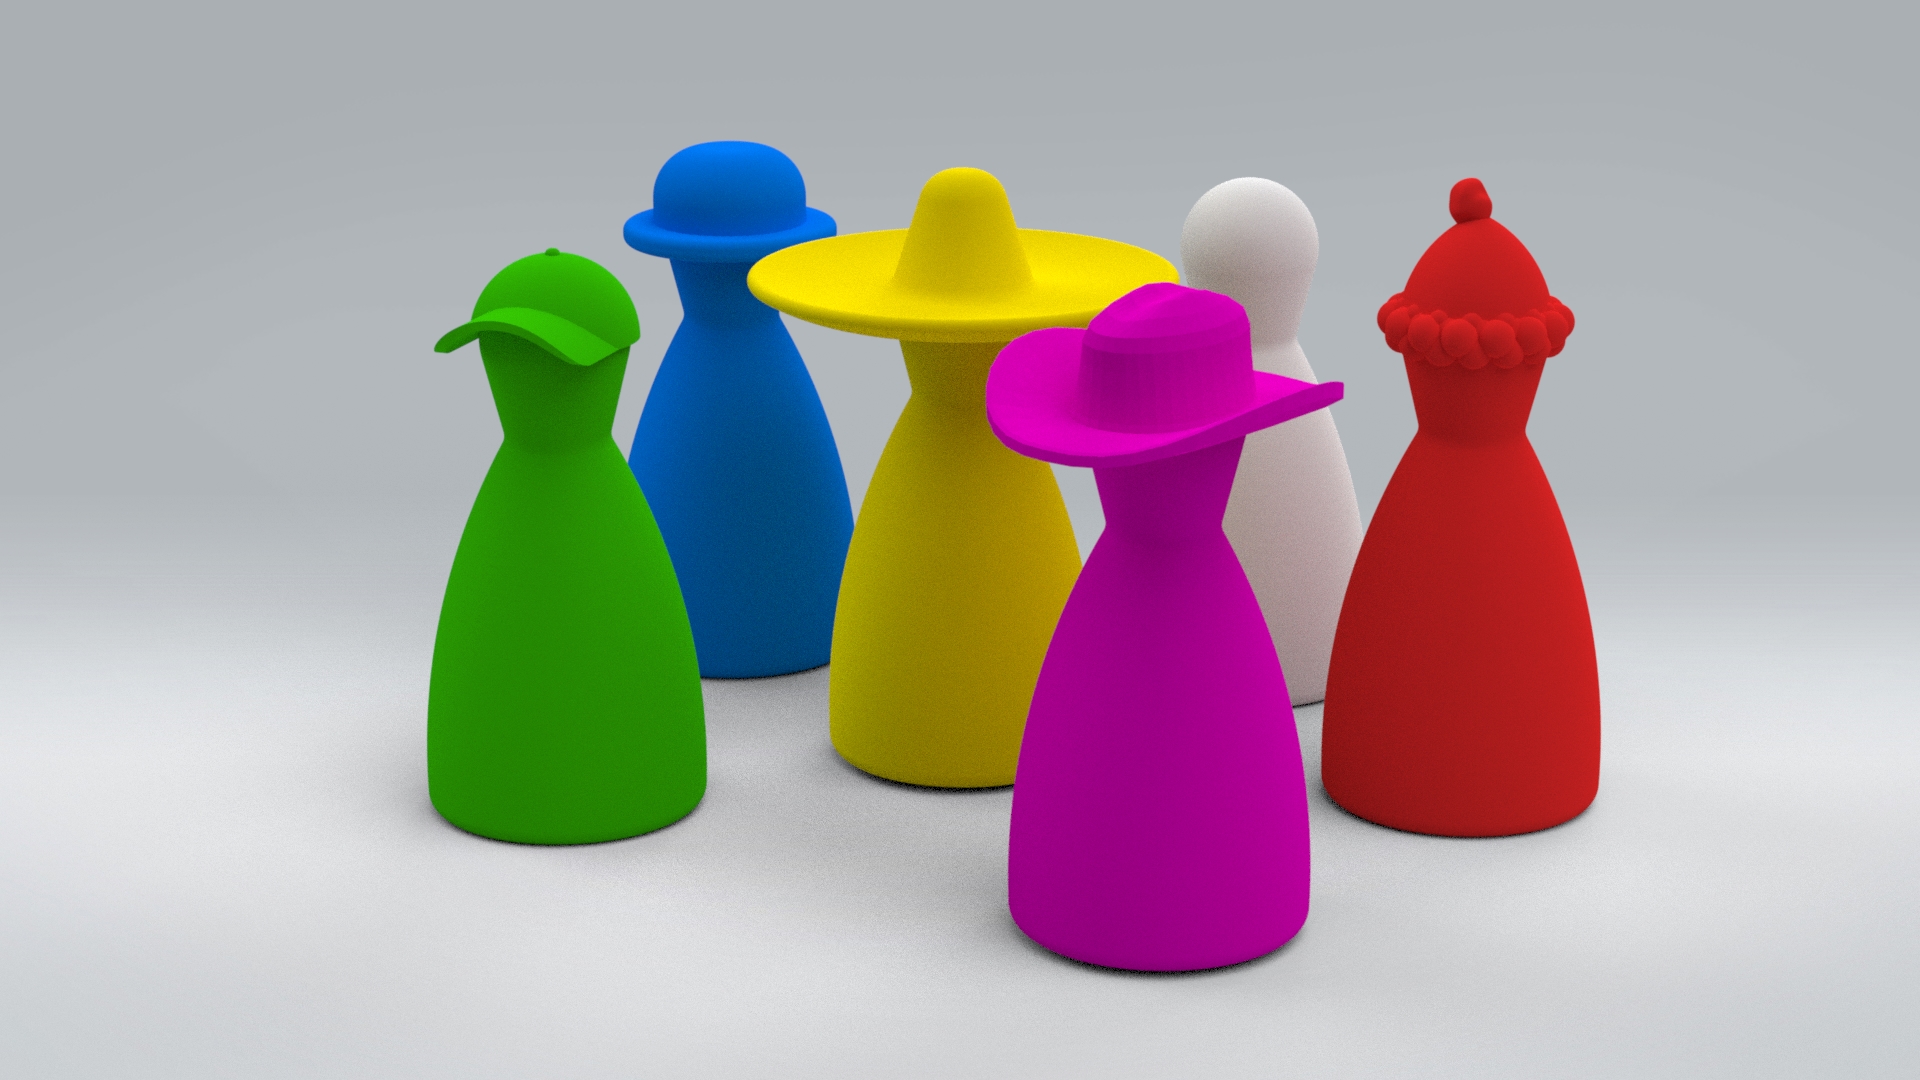 Classic boardgame pieces with hats